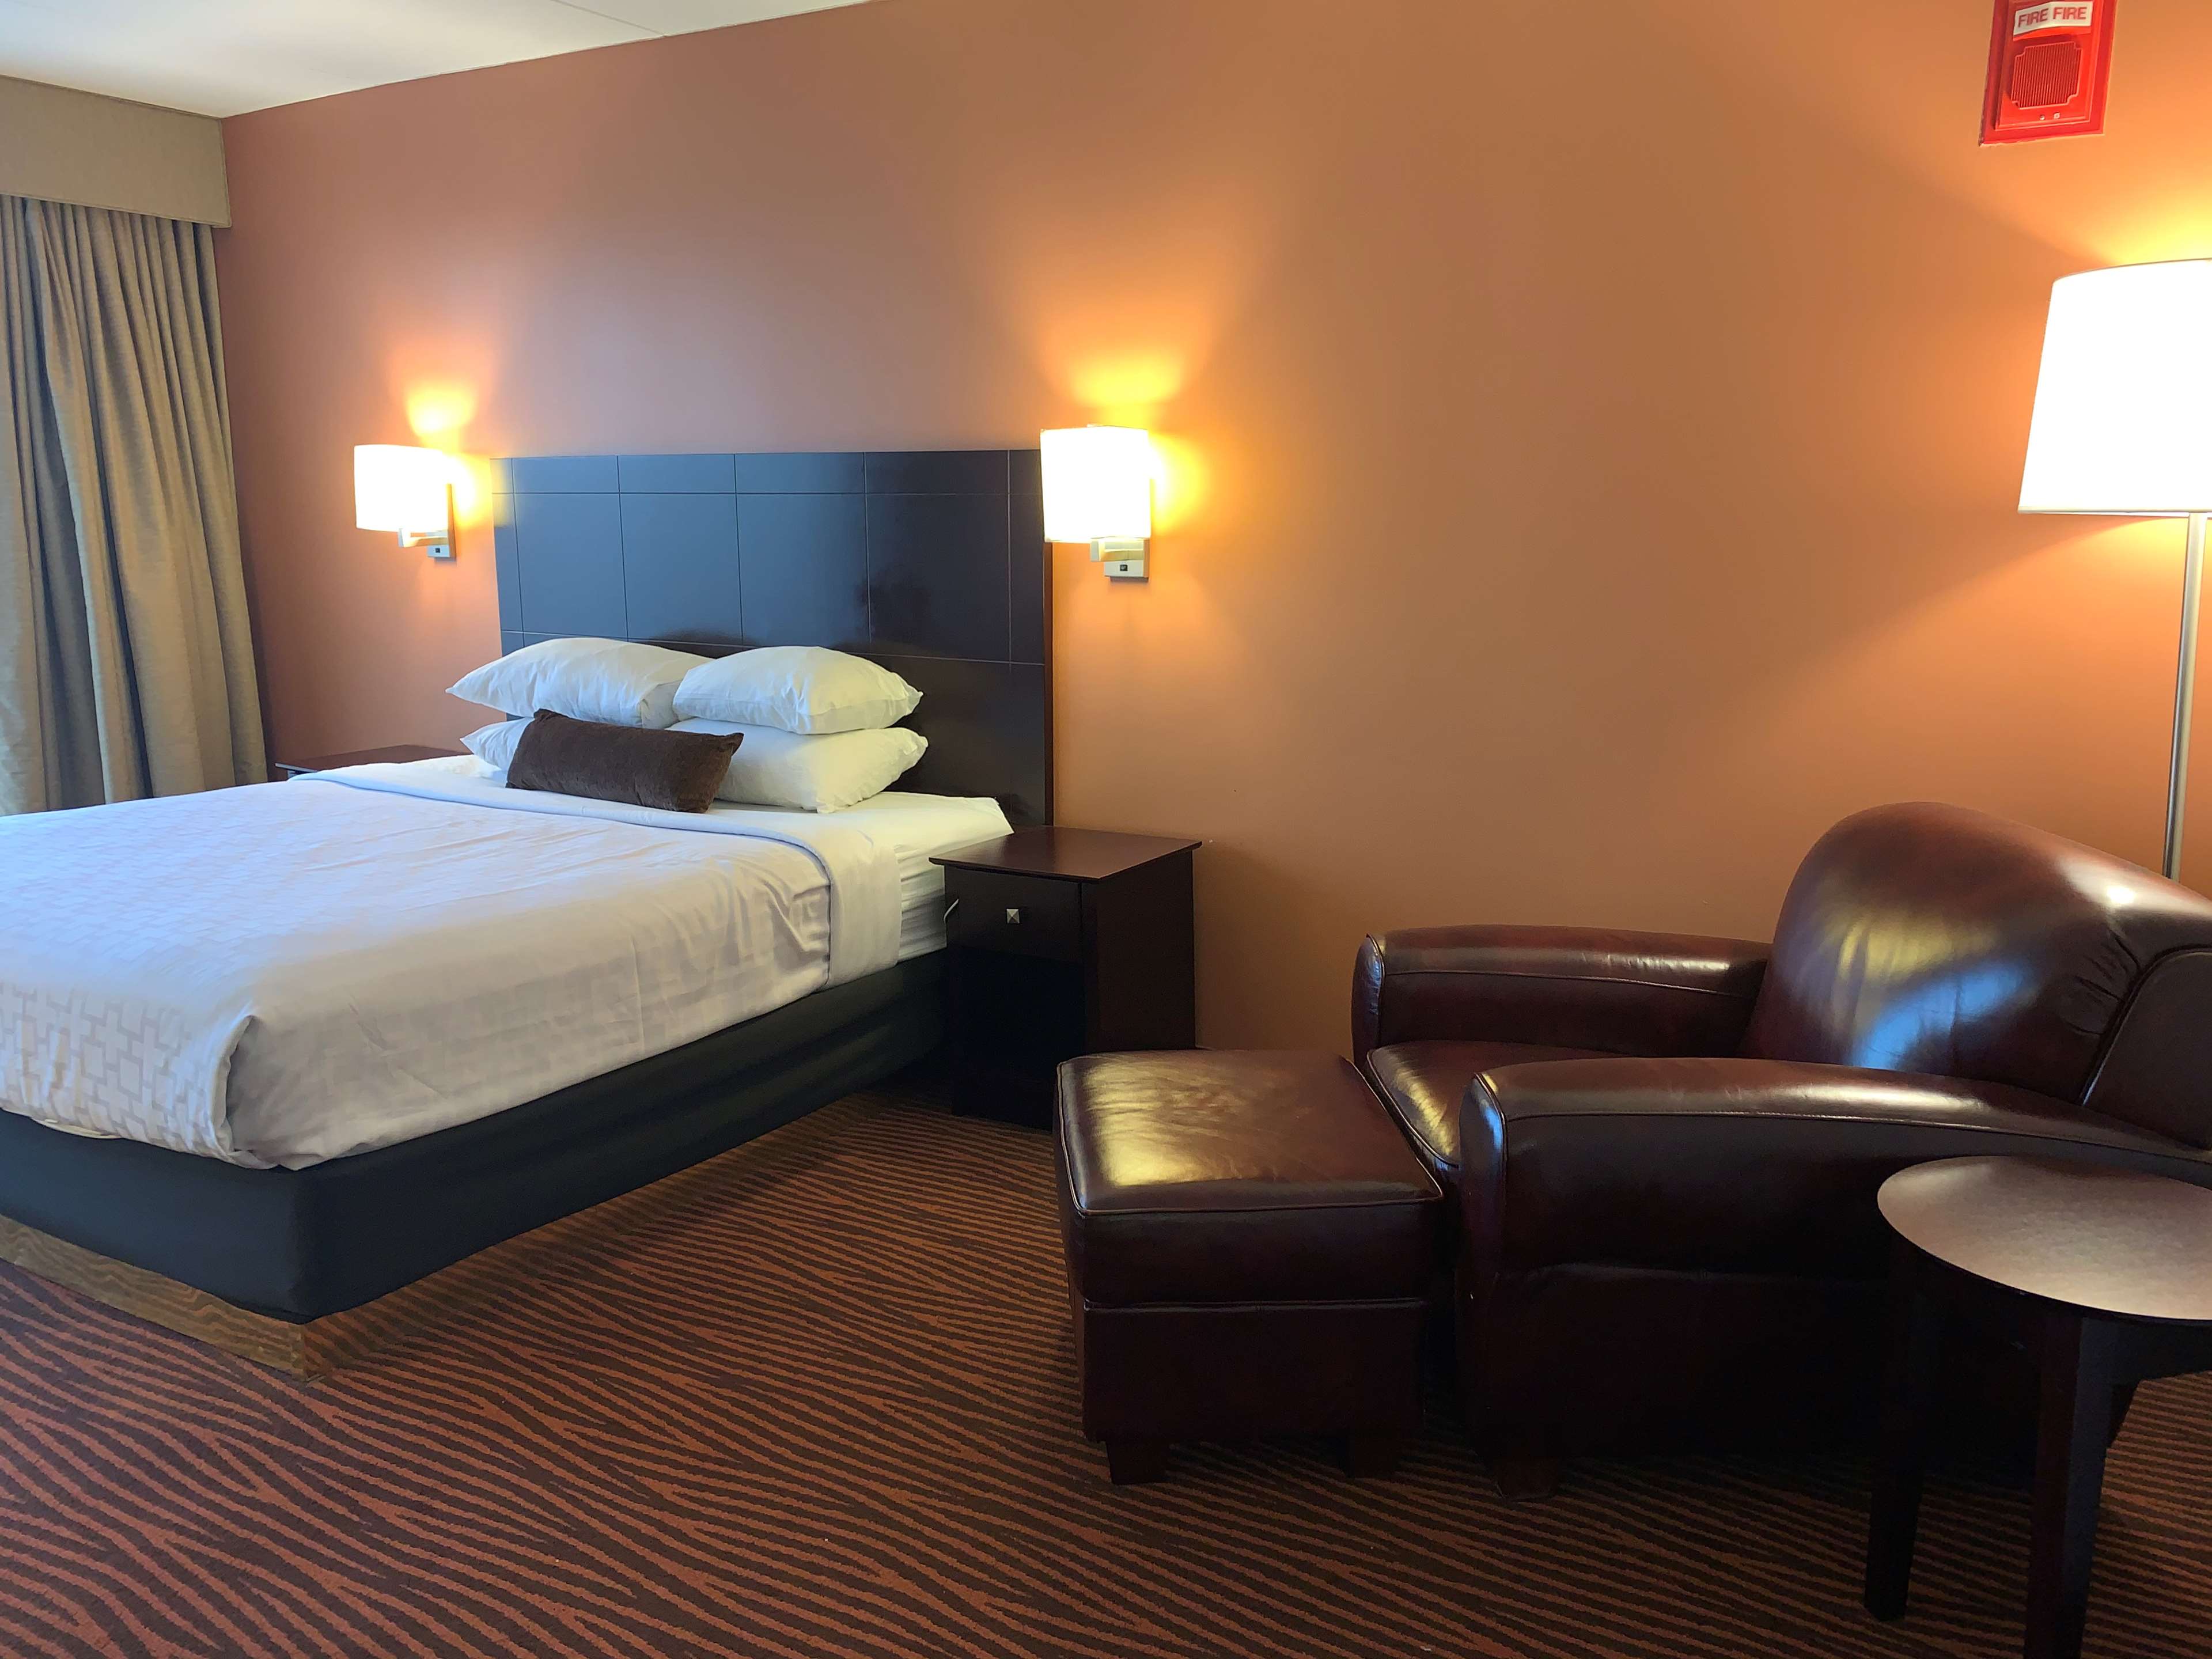 Best Western Executive Hotel of New Haven-West Haven Photo